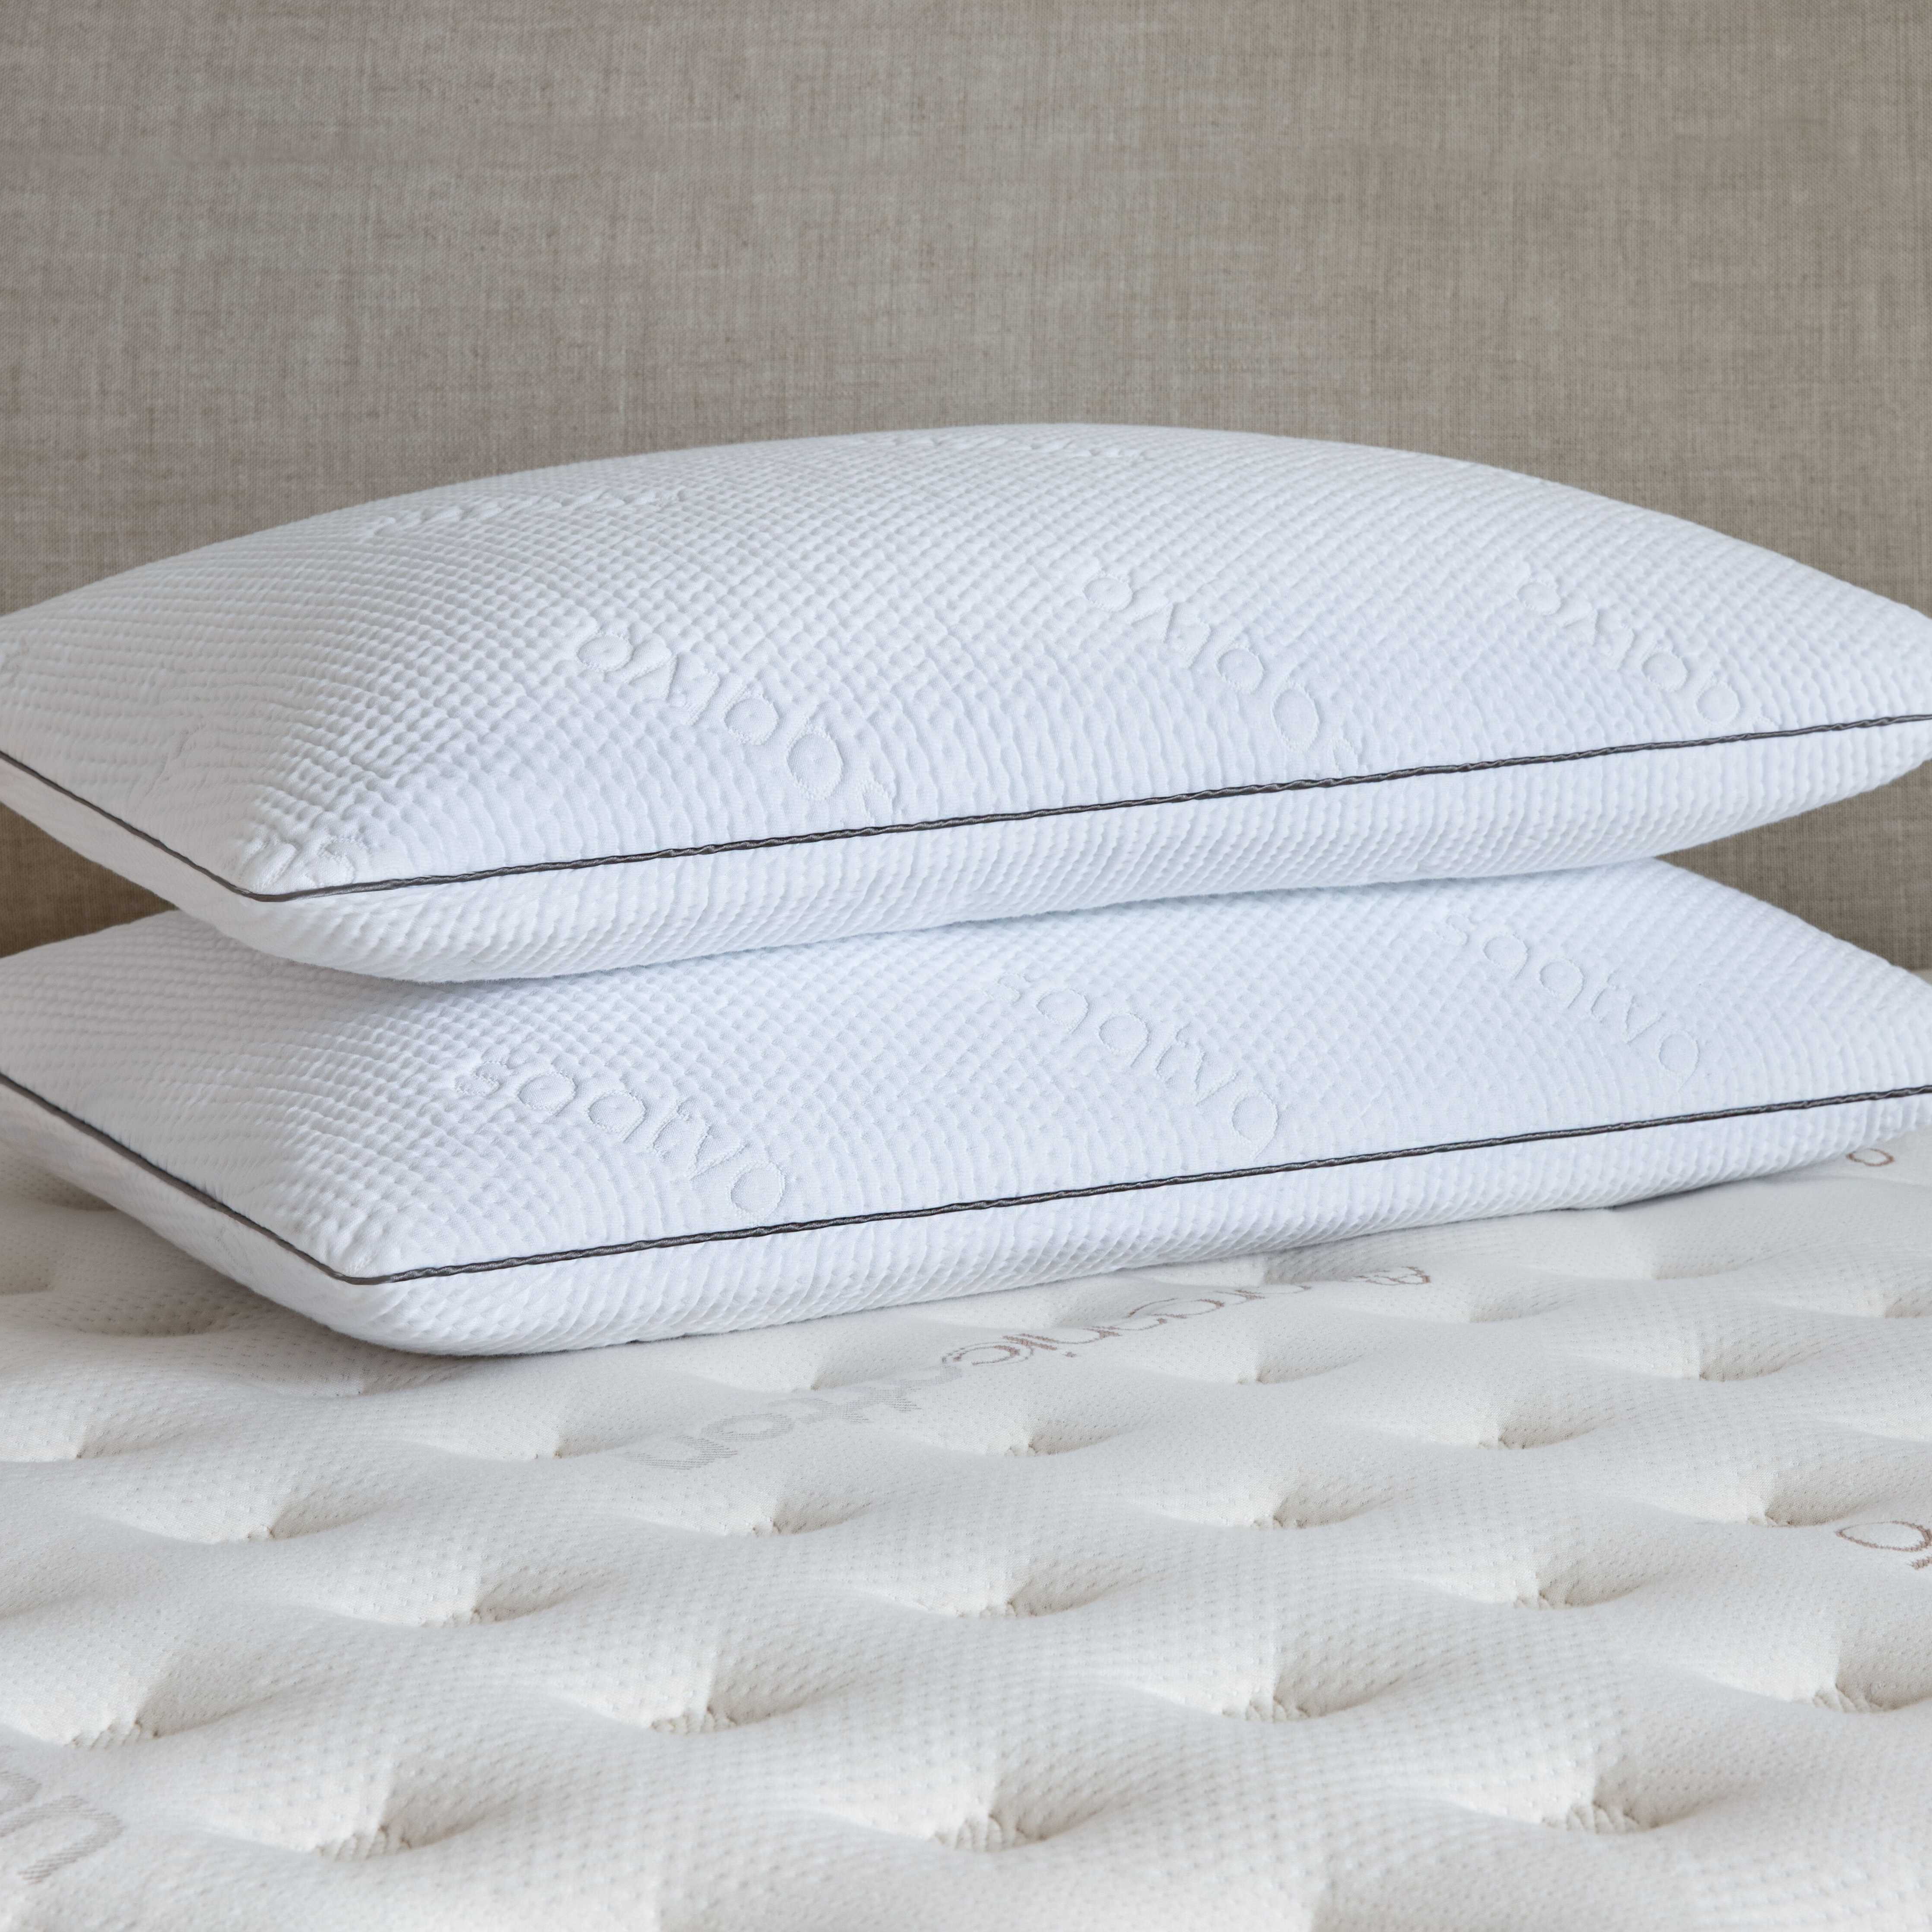 The Saatva Memory Foam Pillow - Queen - King - Graphite Infused Gel Foam - Cool And Comfortable Neck Support - Eco-Friendly